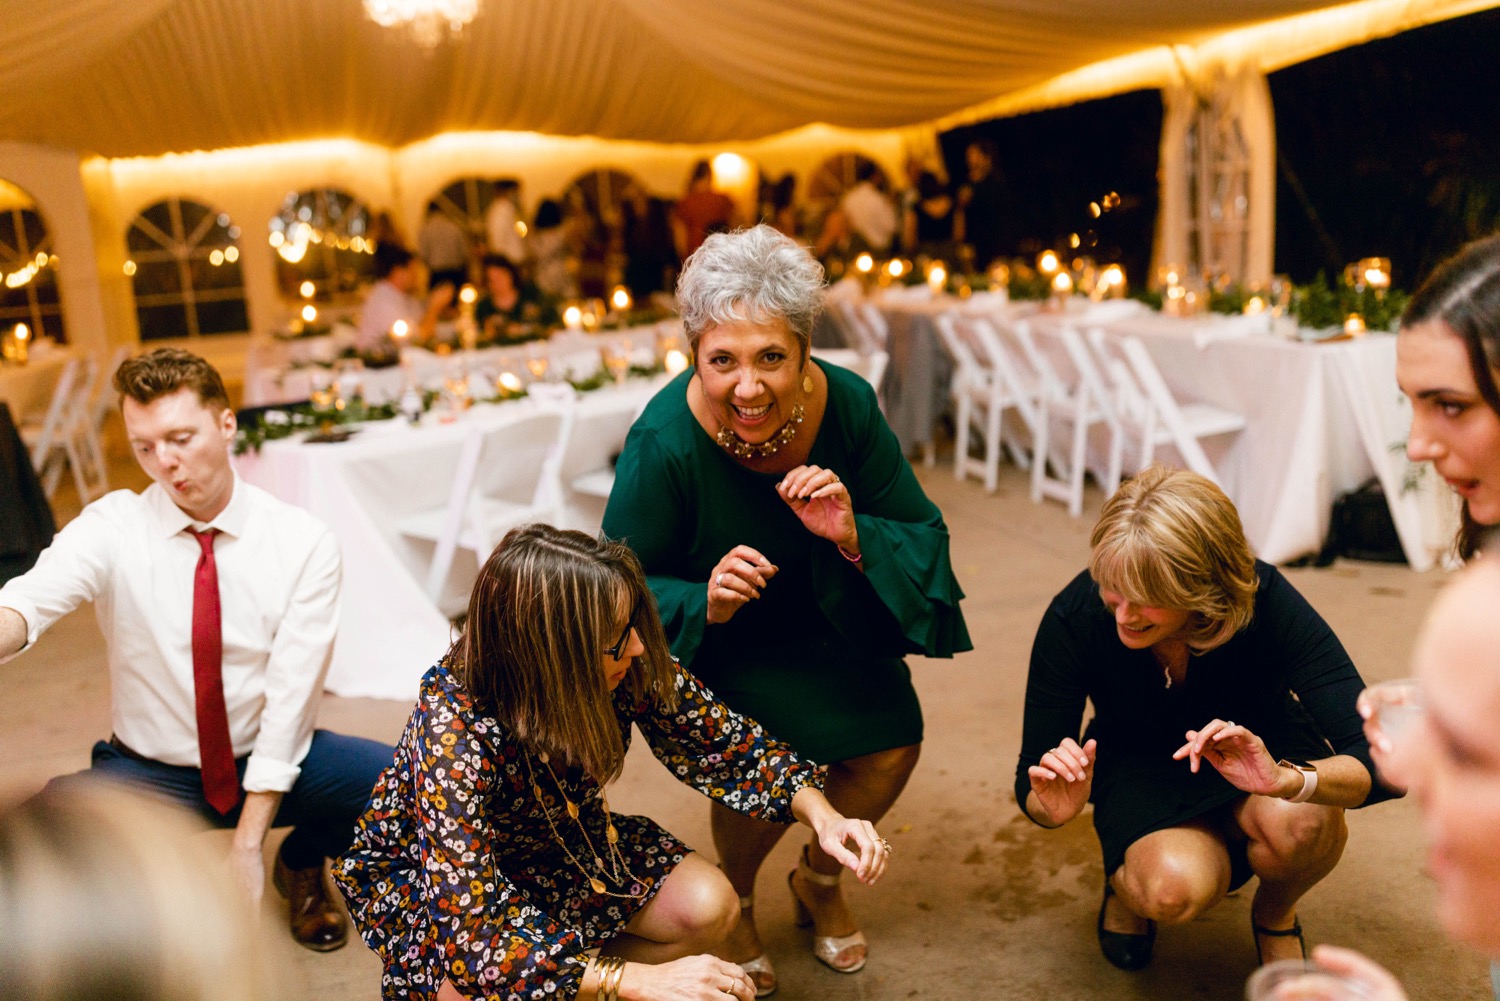 guests getting low dancing at wedding reception